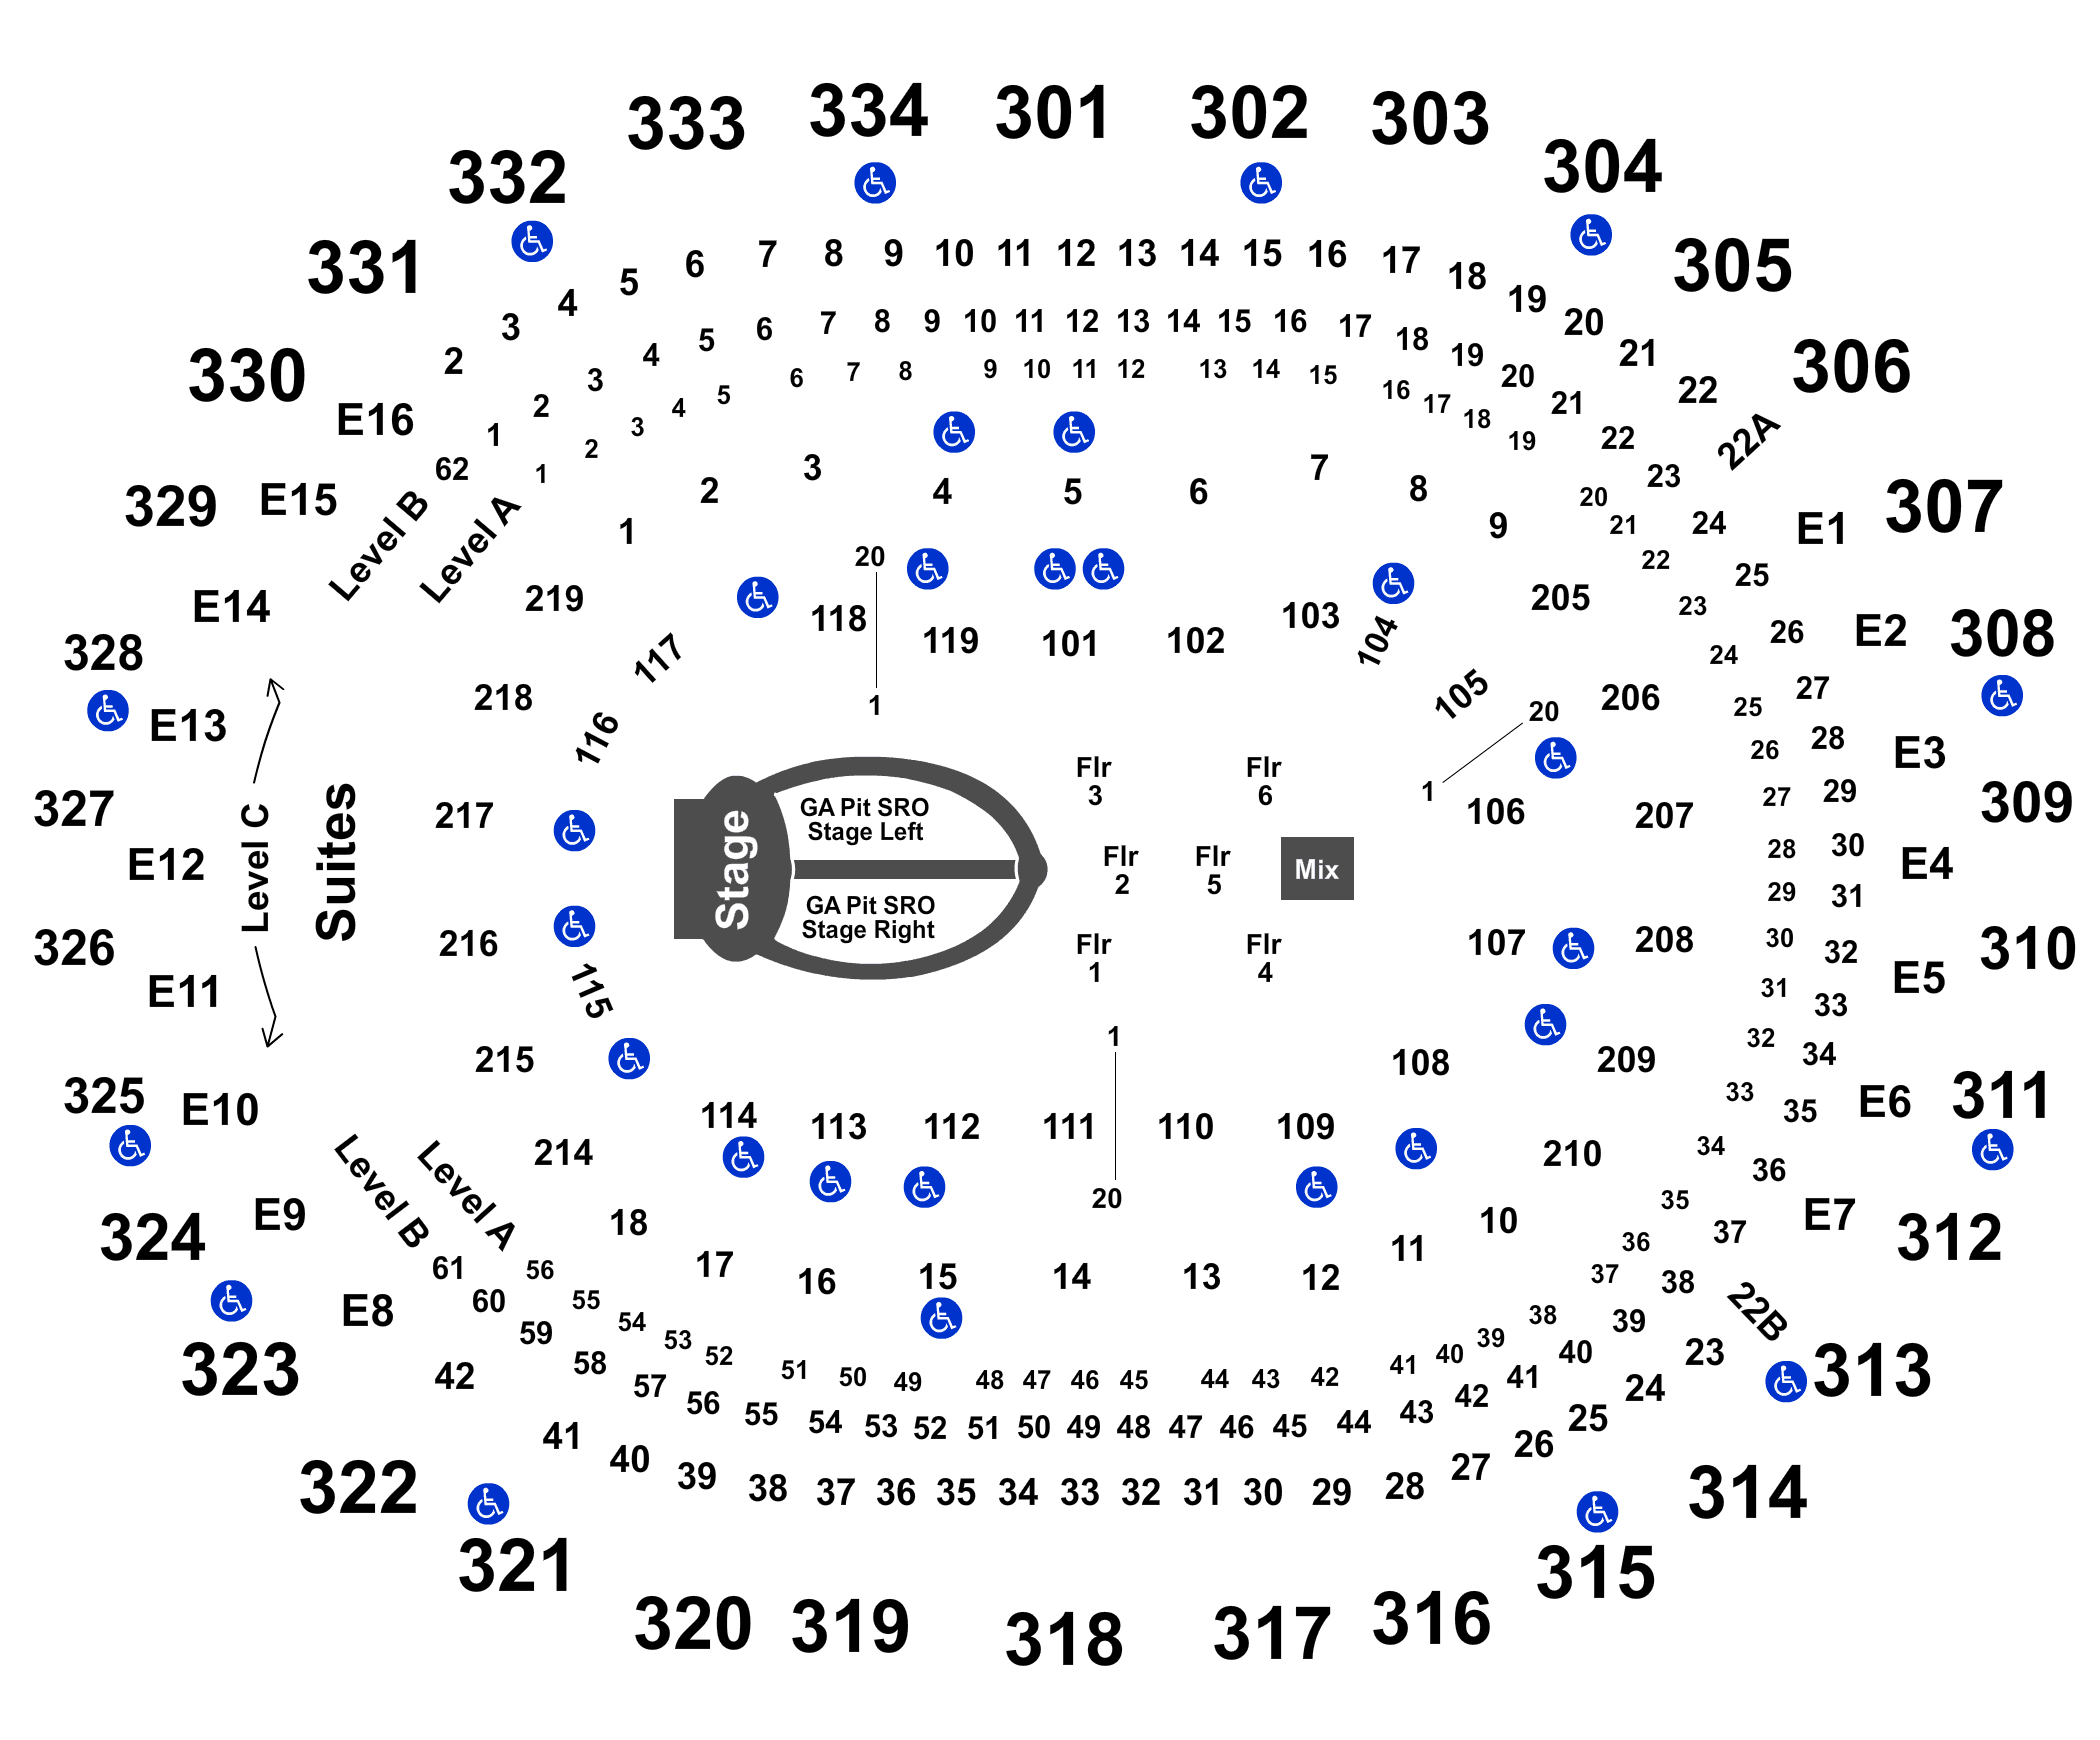 Staples Center Seating Chart Section Pr5